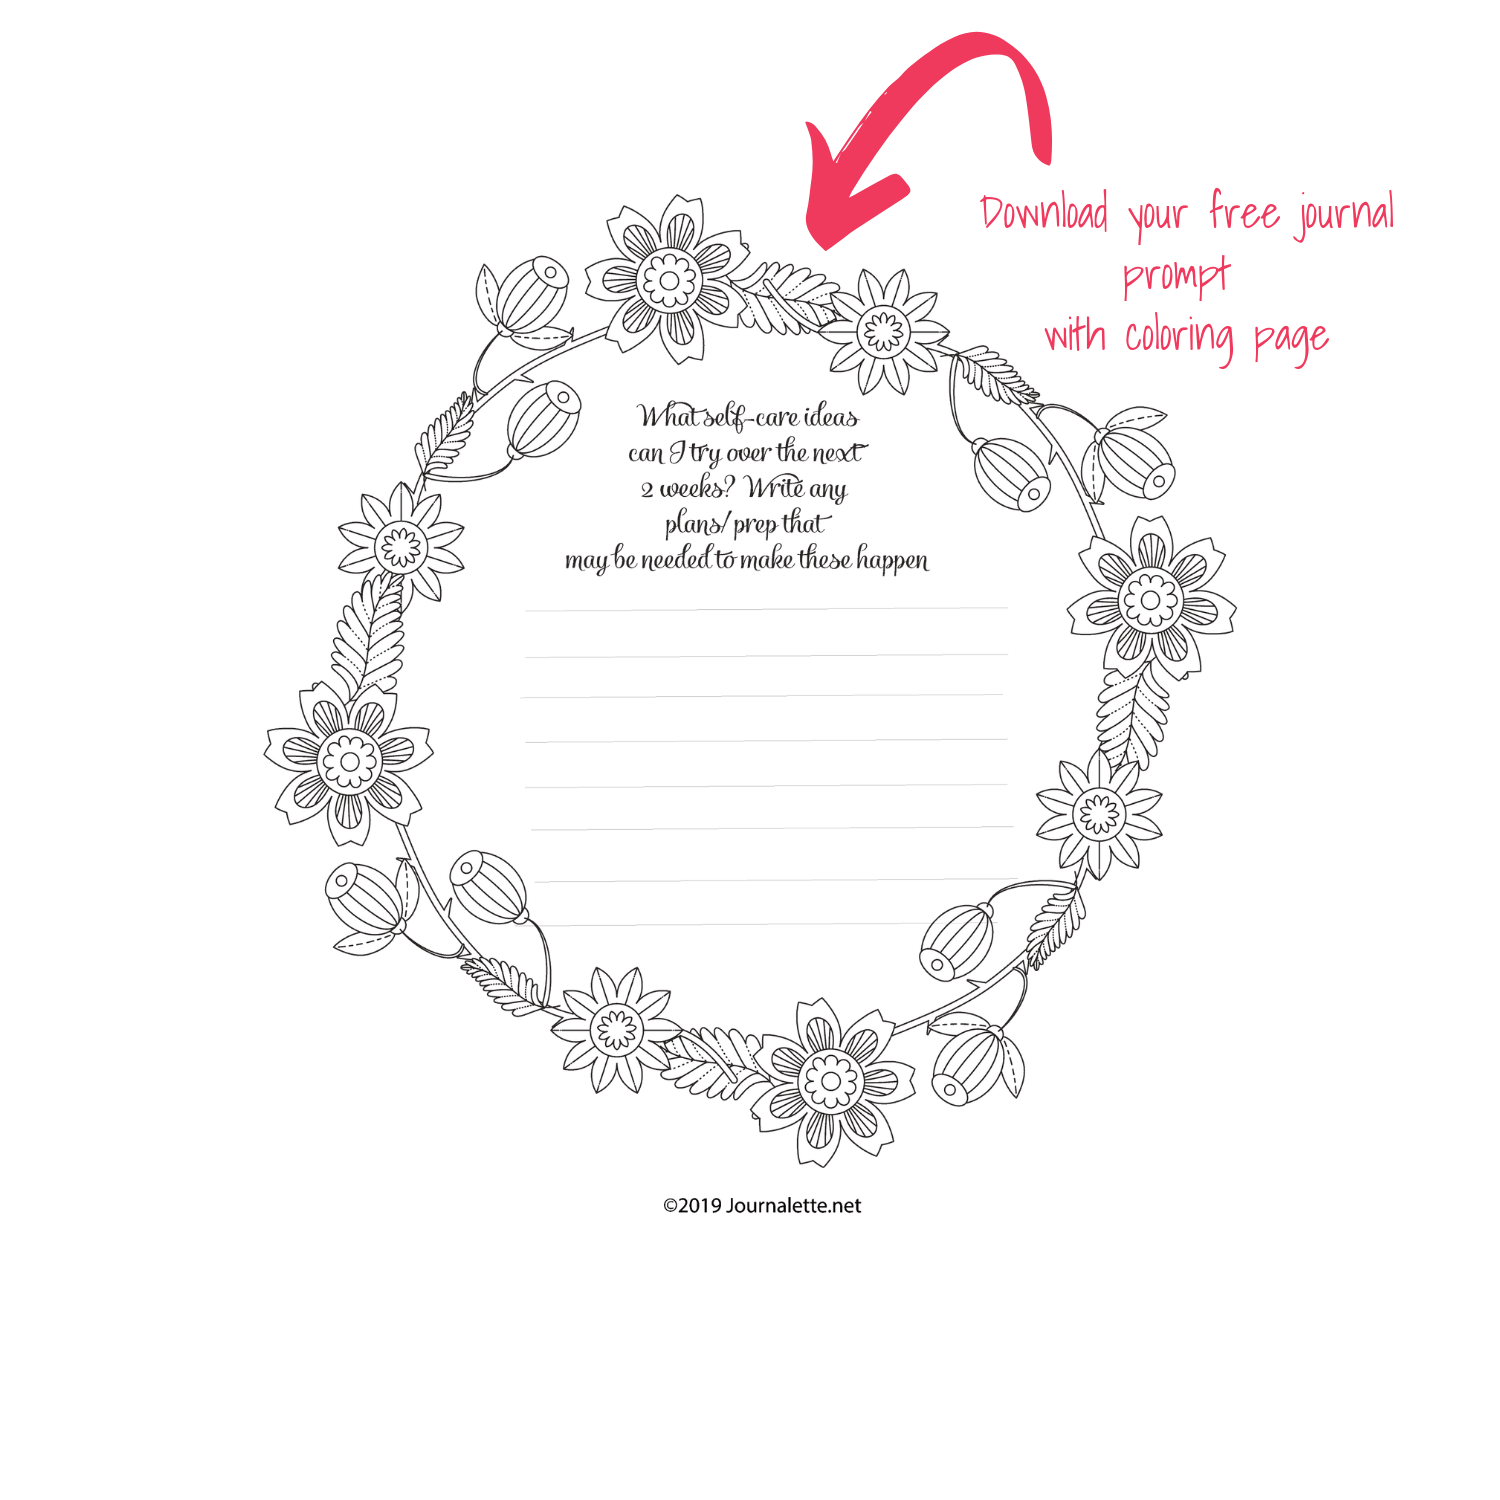 image of printable self care strategies journal prompt coloring page